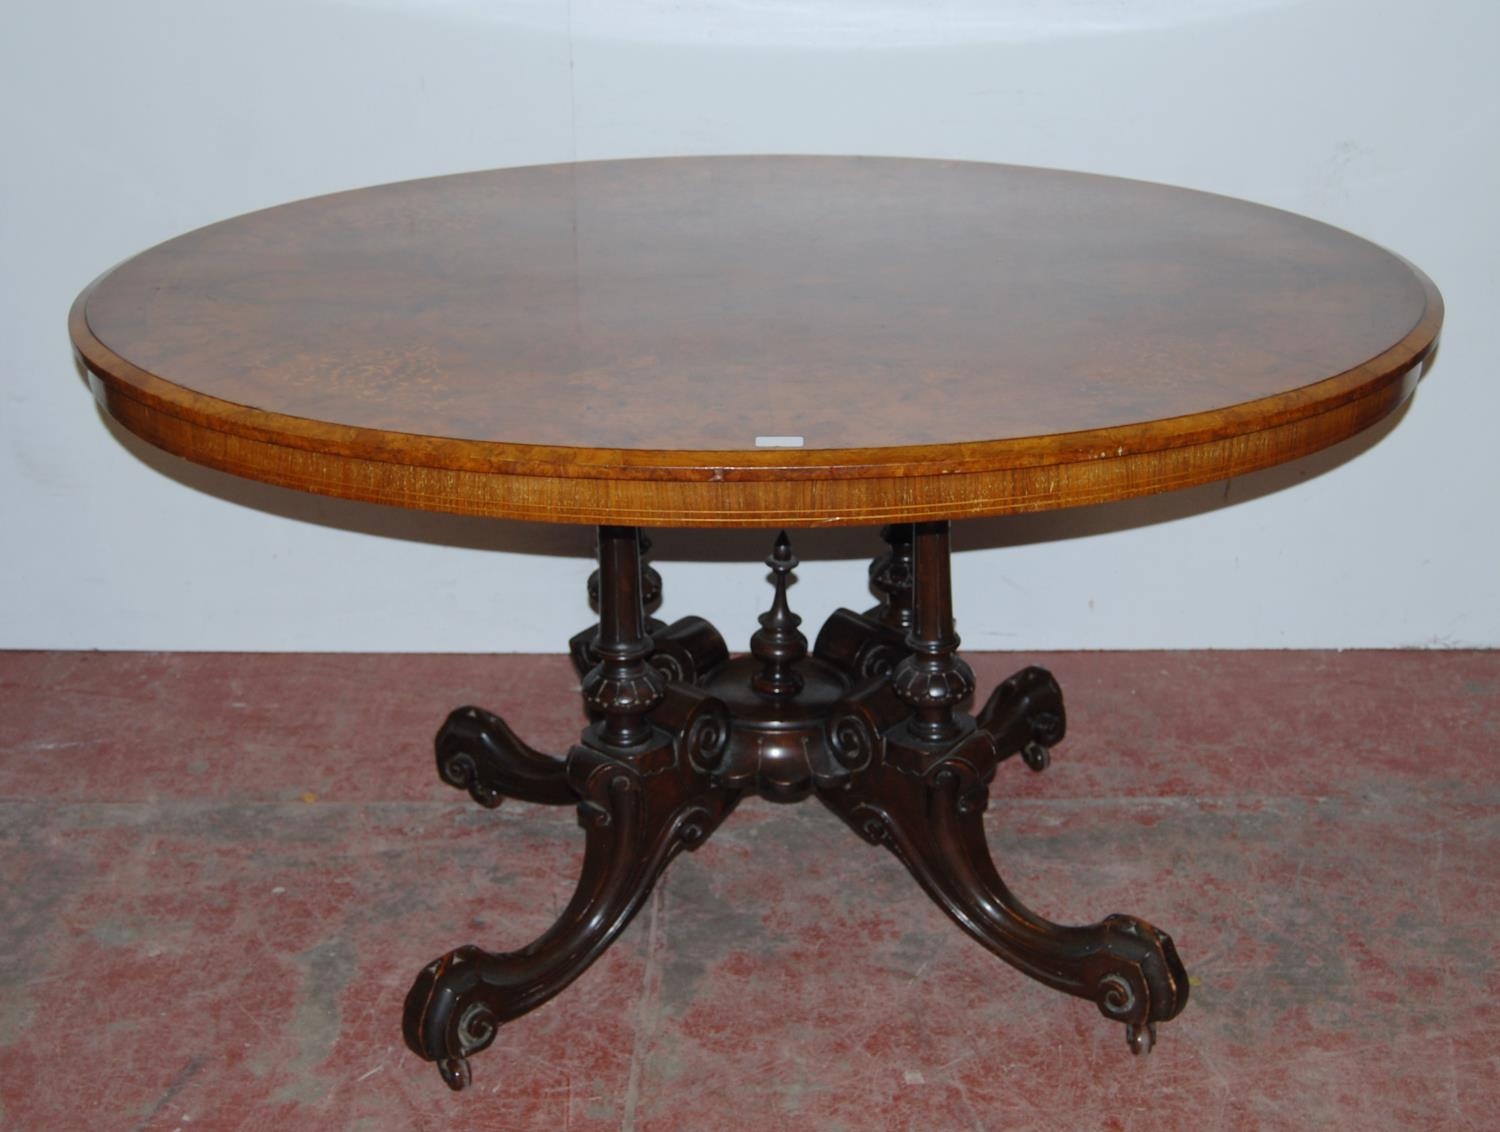 Victorian figured walnut loo type table by James Shoolbred, Tottenham Court Road, London, the inlaid